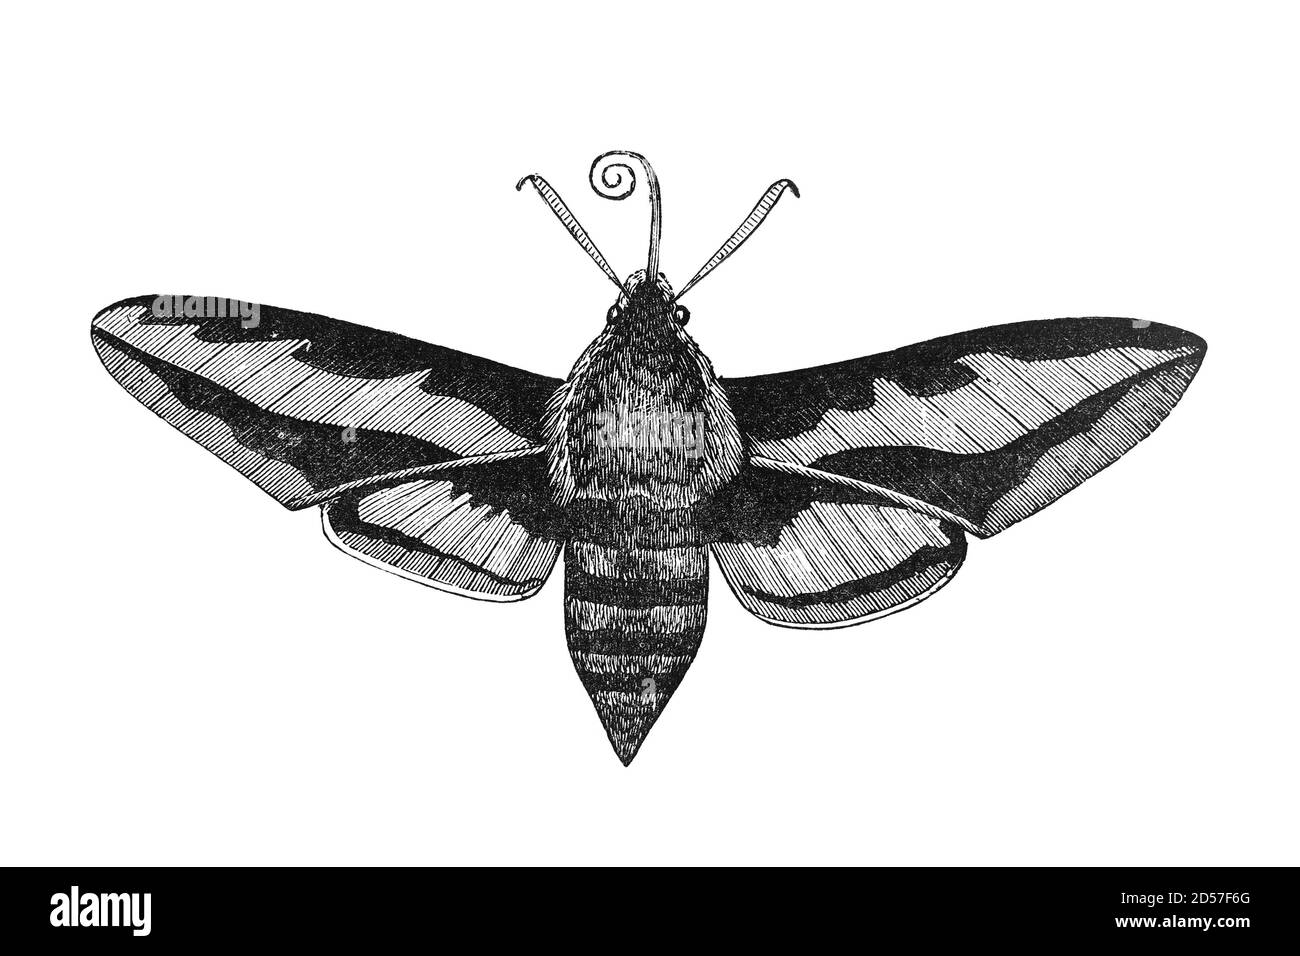 Bedstraw hawk moth insect, vintage illustration. Sourced from antique book "The Playtime Naturalist" by Dr. J.E. Taylor, published in London UK, 1889. Stock Photo